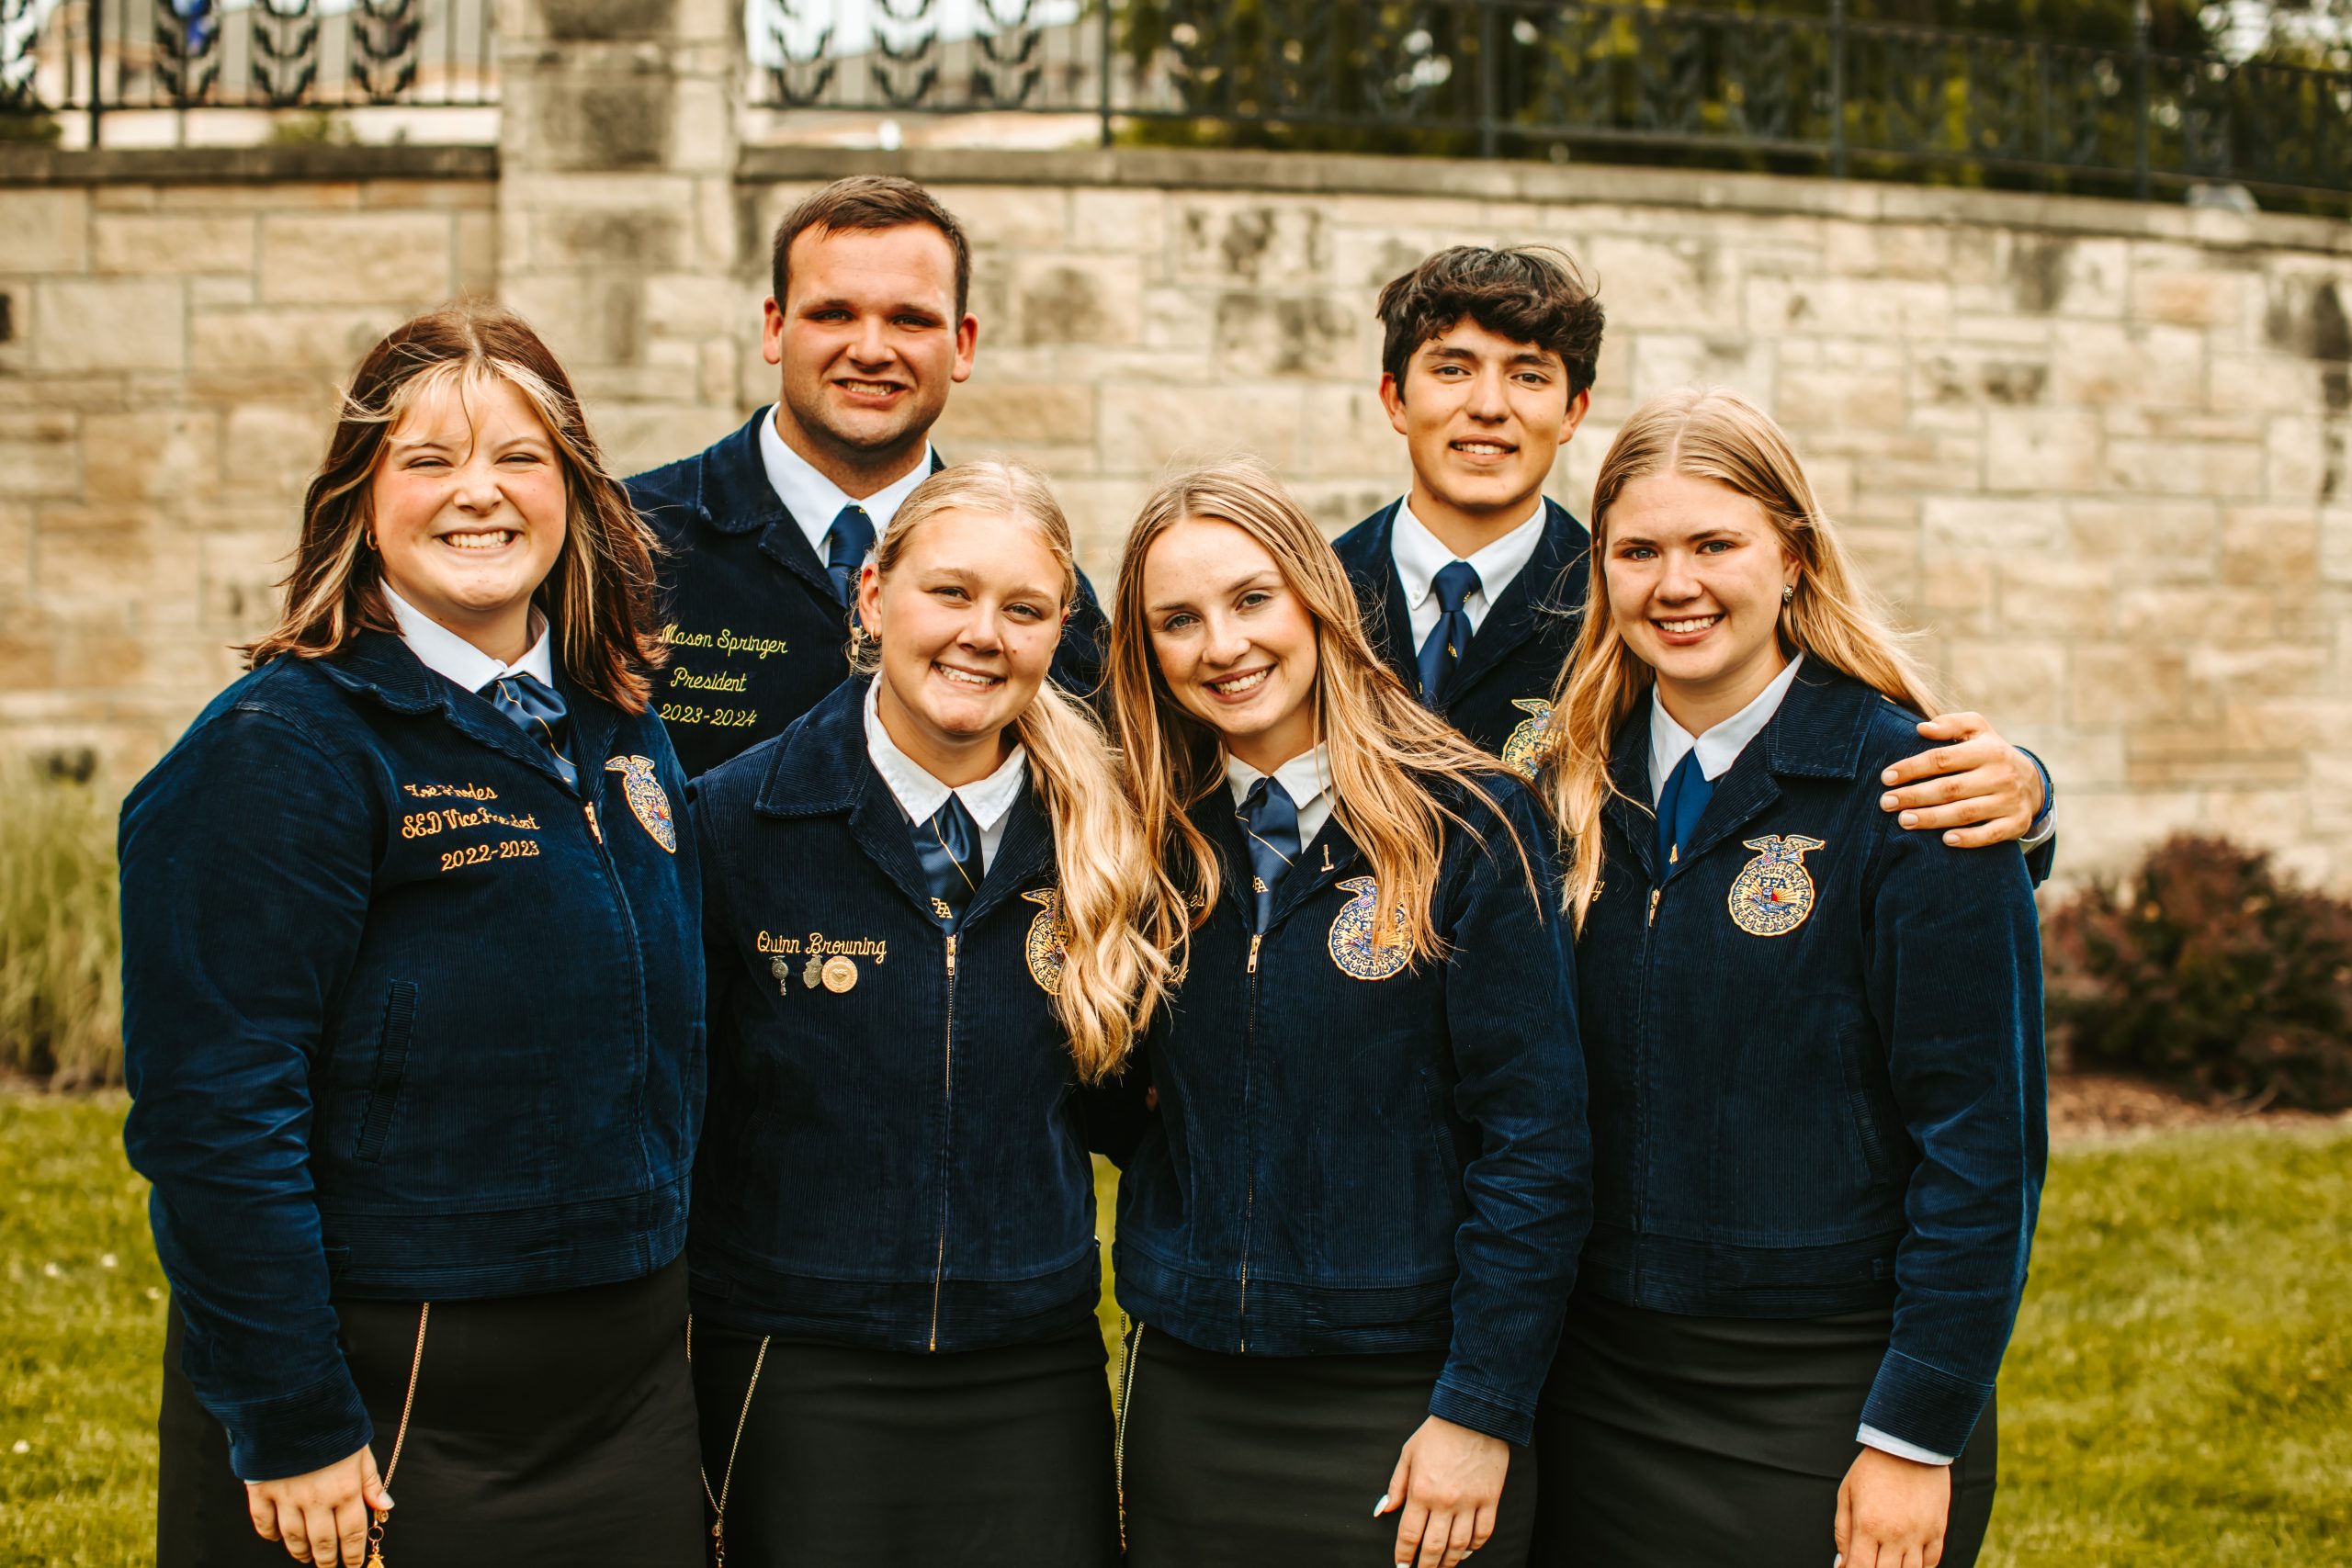 The Kansas FFA state officer team includes President Jory Ratzlaff, from the Canton-Galva FFA chapter; Vice President Hayley Hines, from the Paola FFA chapter; Secretary Quinn Browning, from the Prairie View FFA chapter; Treasurer Zoe Rhodes, from the Girard FFA chapter; Reporter Mason Springer, from the Neodesha FFA chapter; and Sentinel Natalee Bray, from the Pike Valley FFA chapter. (Courtesy photo.)